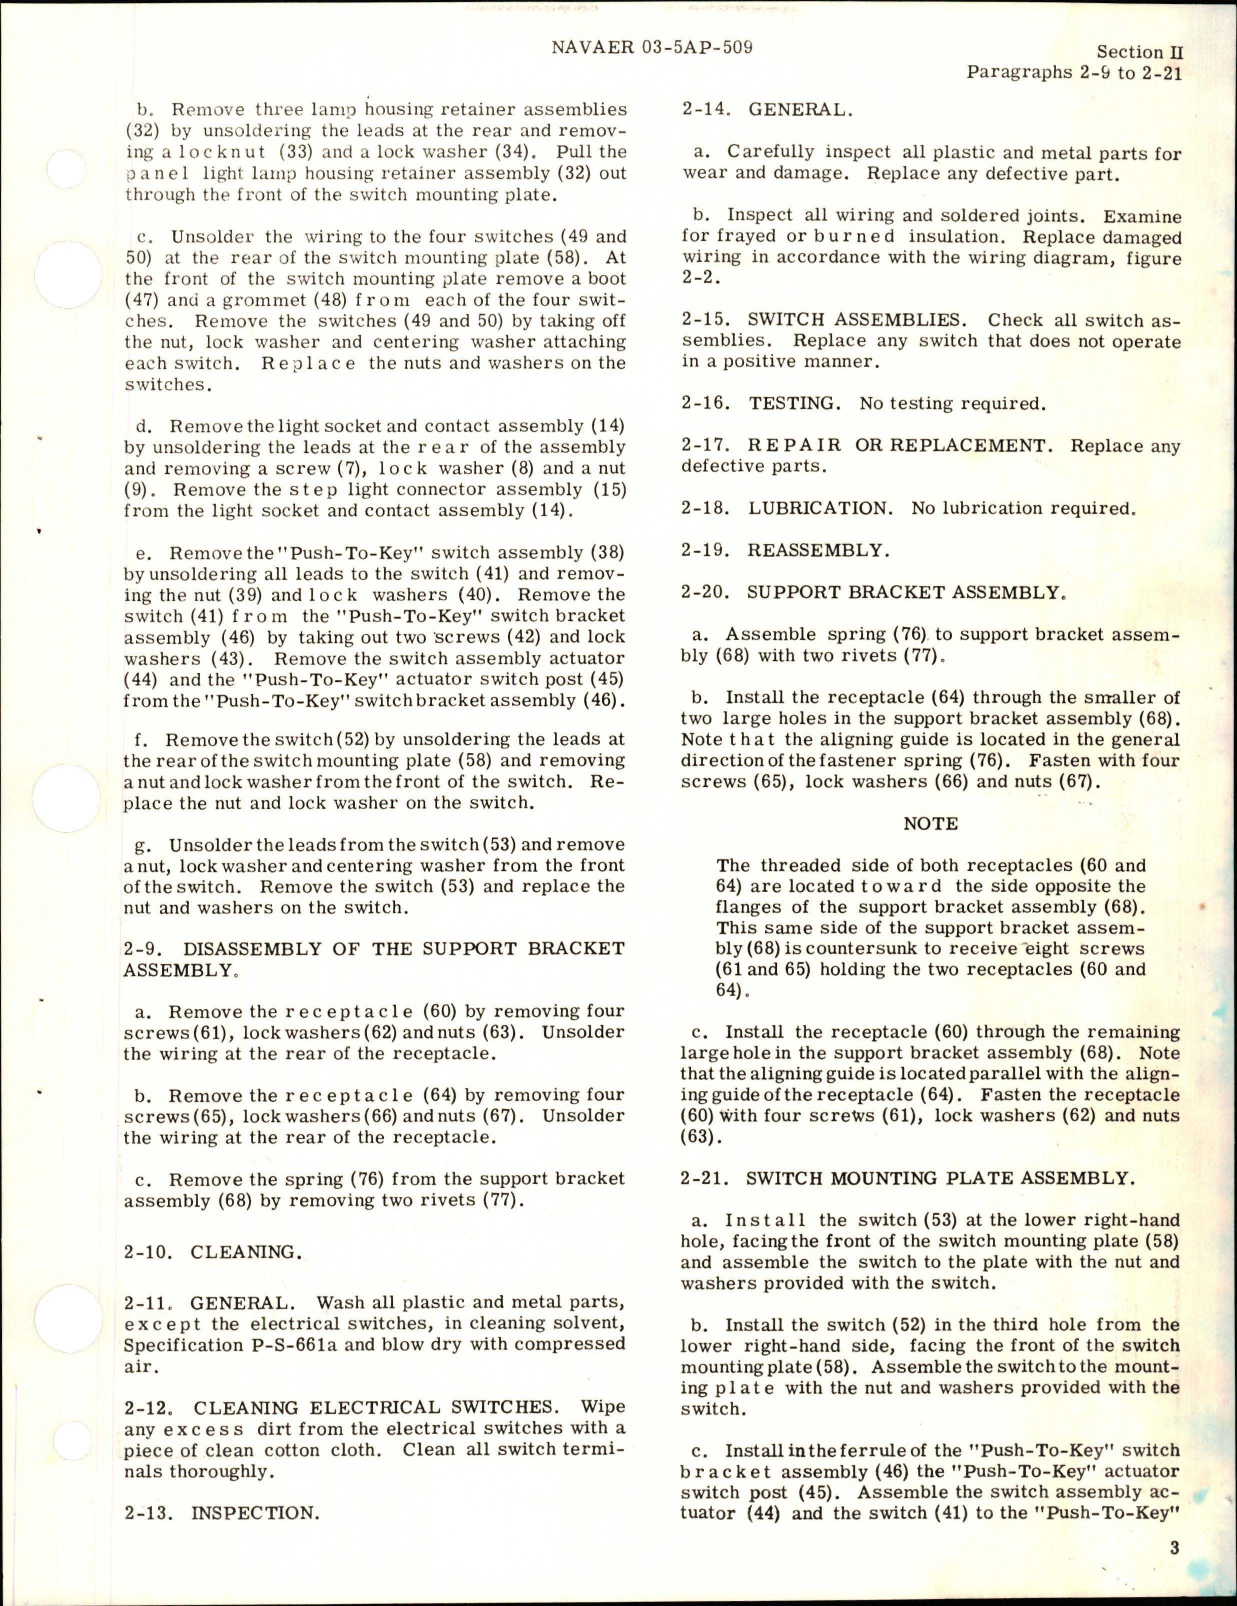 Sample page 7 from AirCorps Library document: Overhaul Instructions for Exterior Lights Control Box 